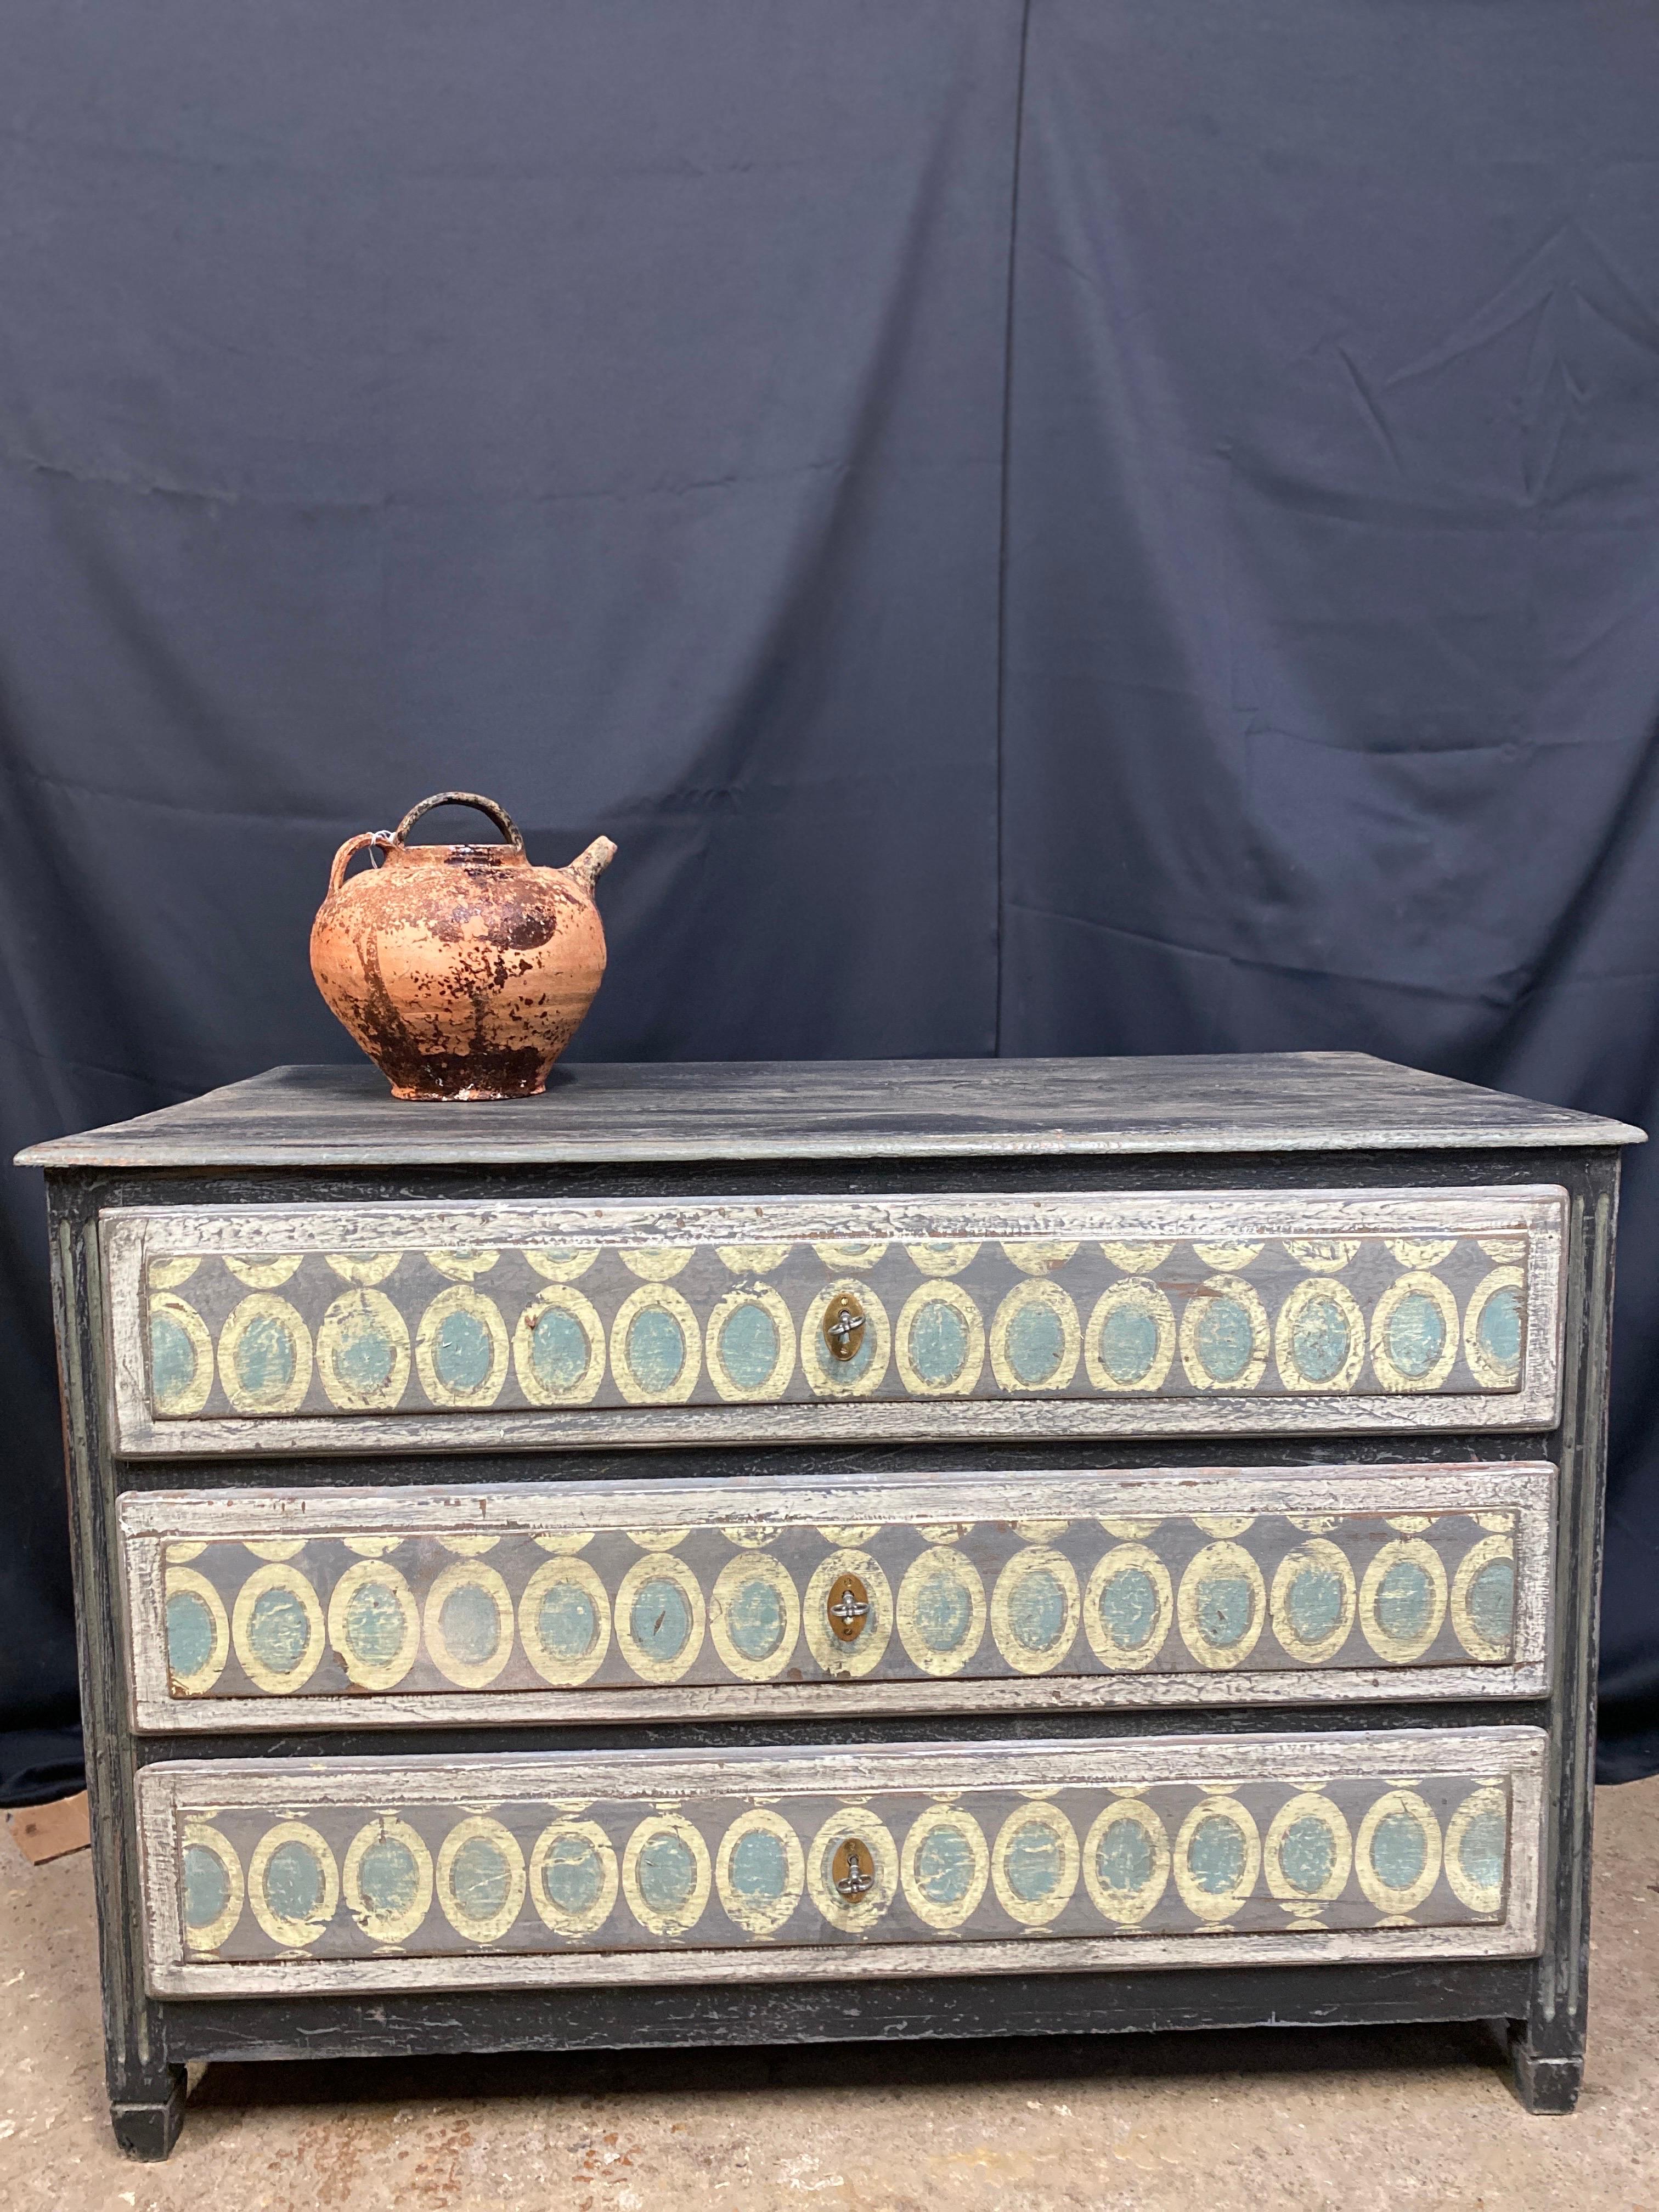 Louis xvi chest of drawers 3 patina drawers with different shapes and colors For Sale 3